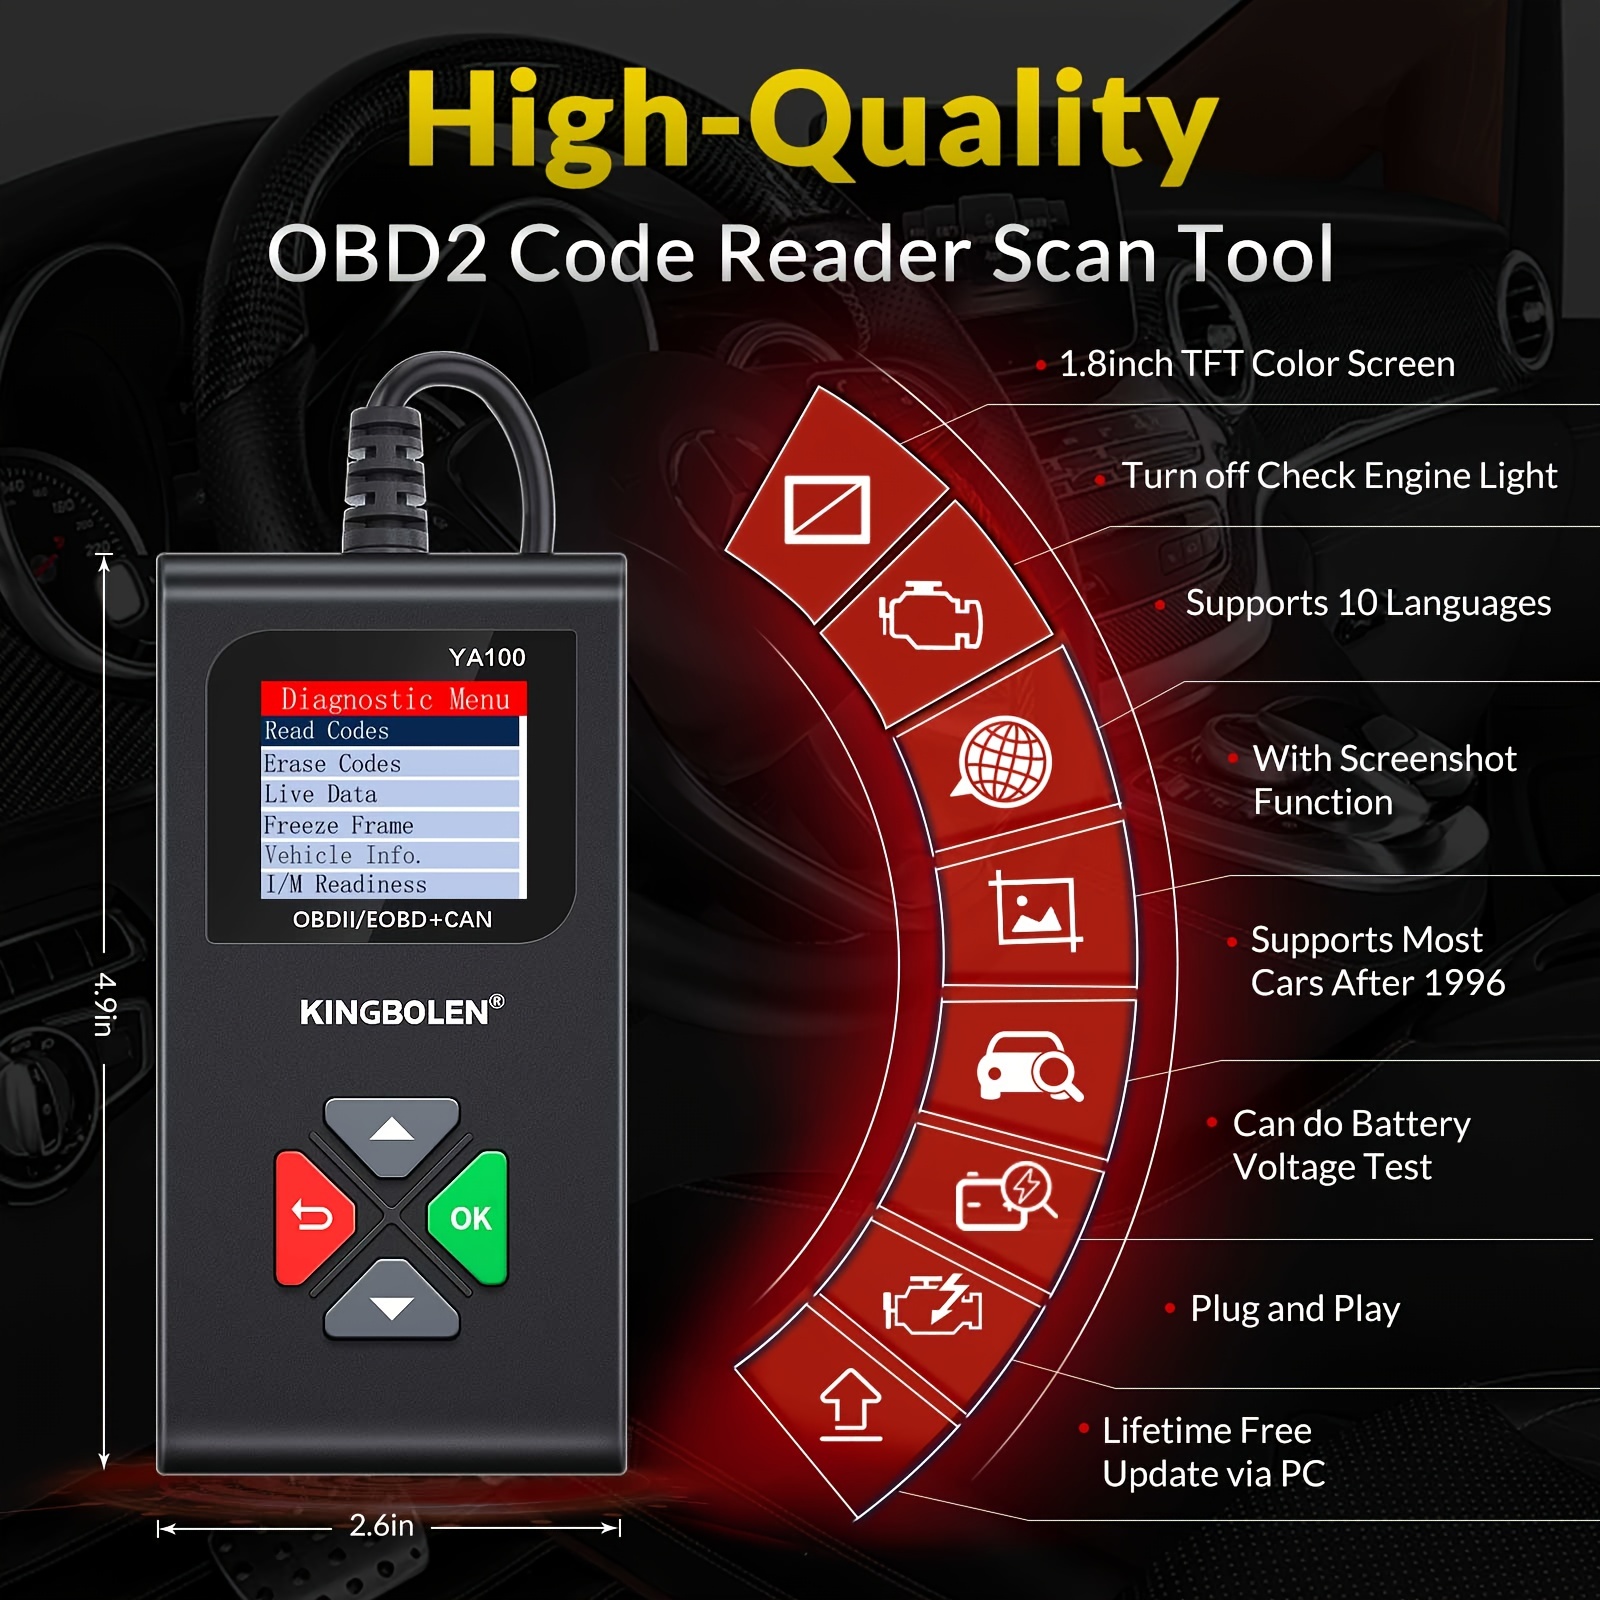 Kingbolen Scanner Tools are suitable for users at different stages, th